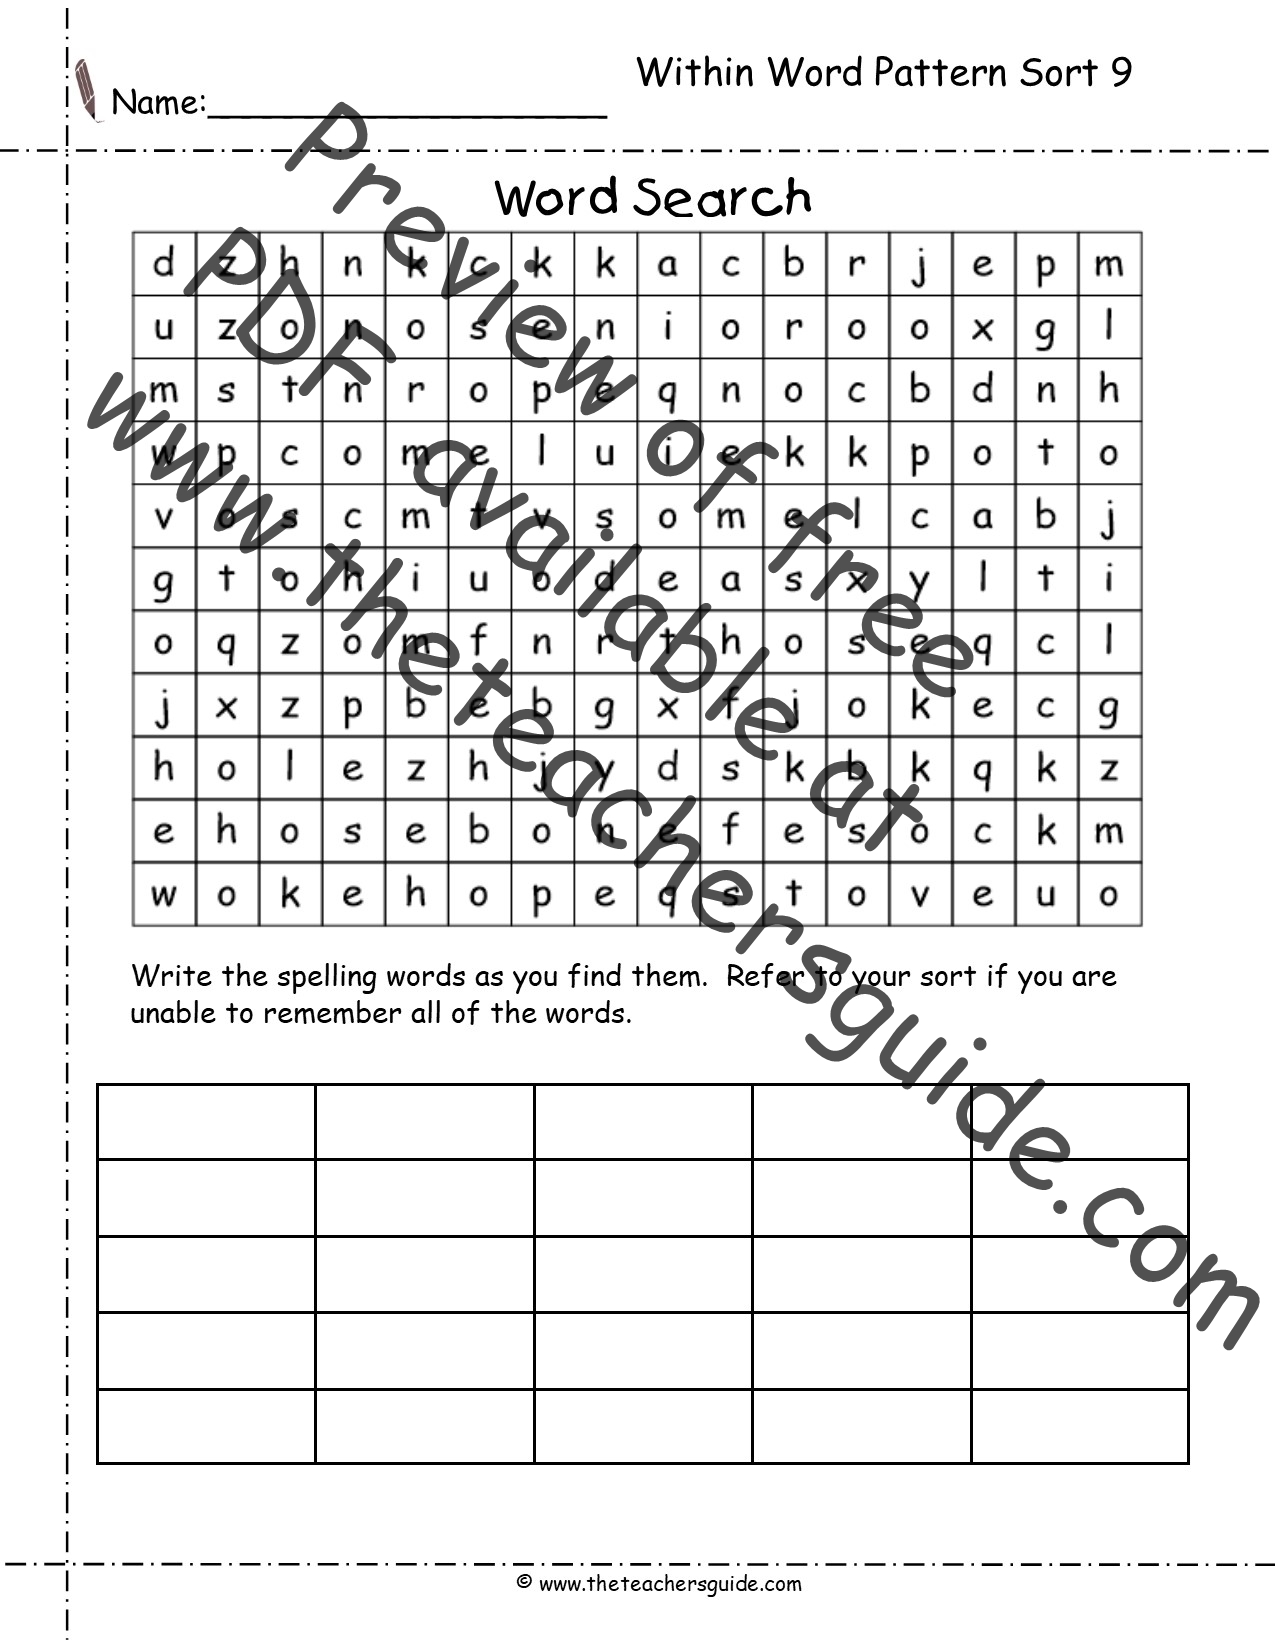 Words Their Way Within Word Patterns Worksheets